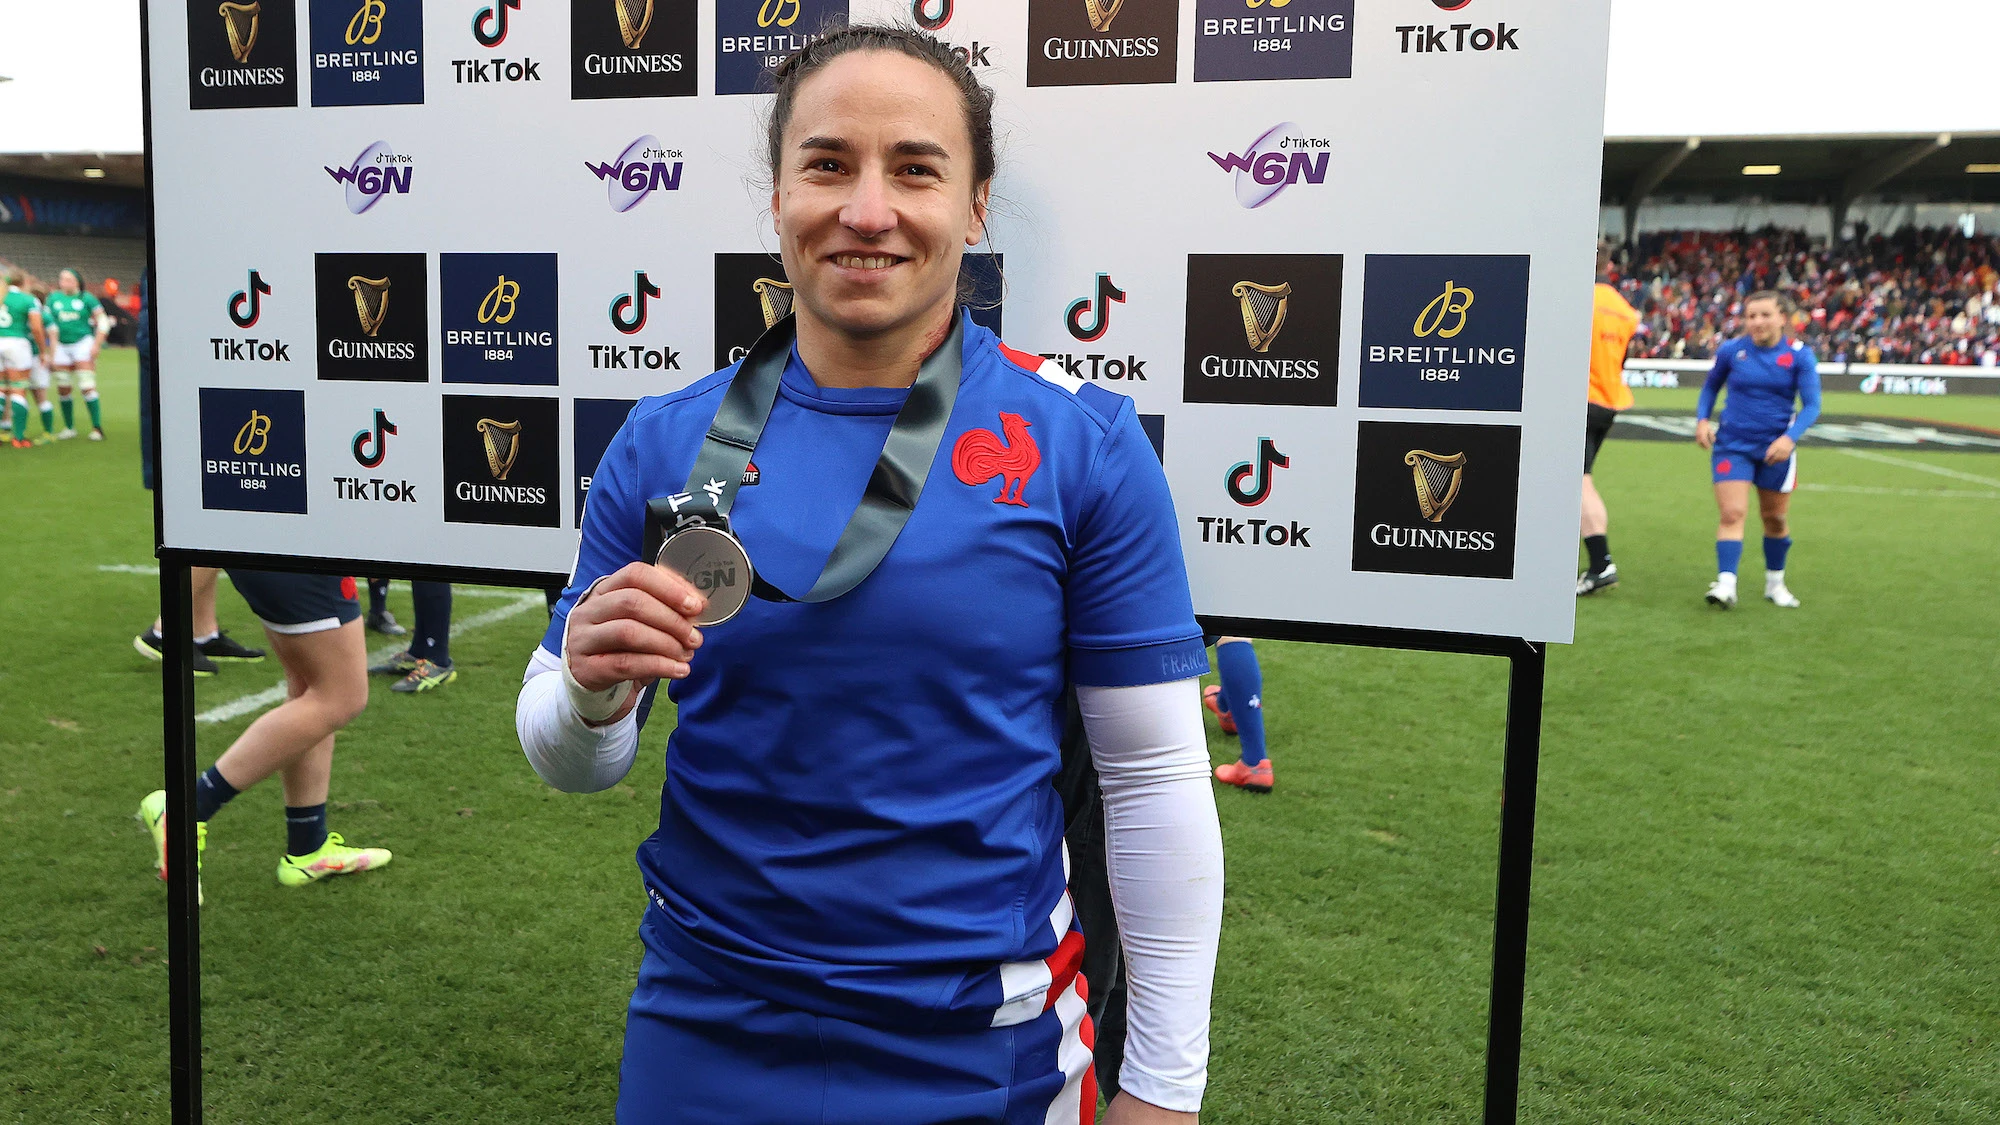 Laure Sansus is awarded the player of the match 2/4/2022